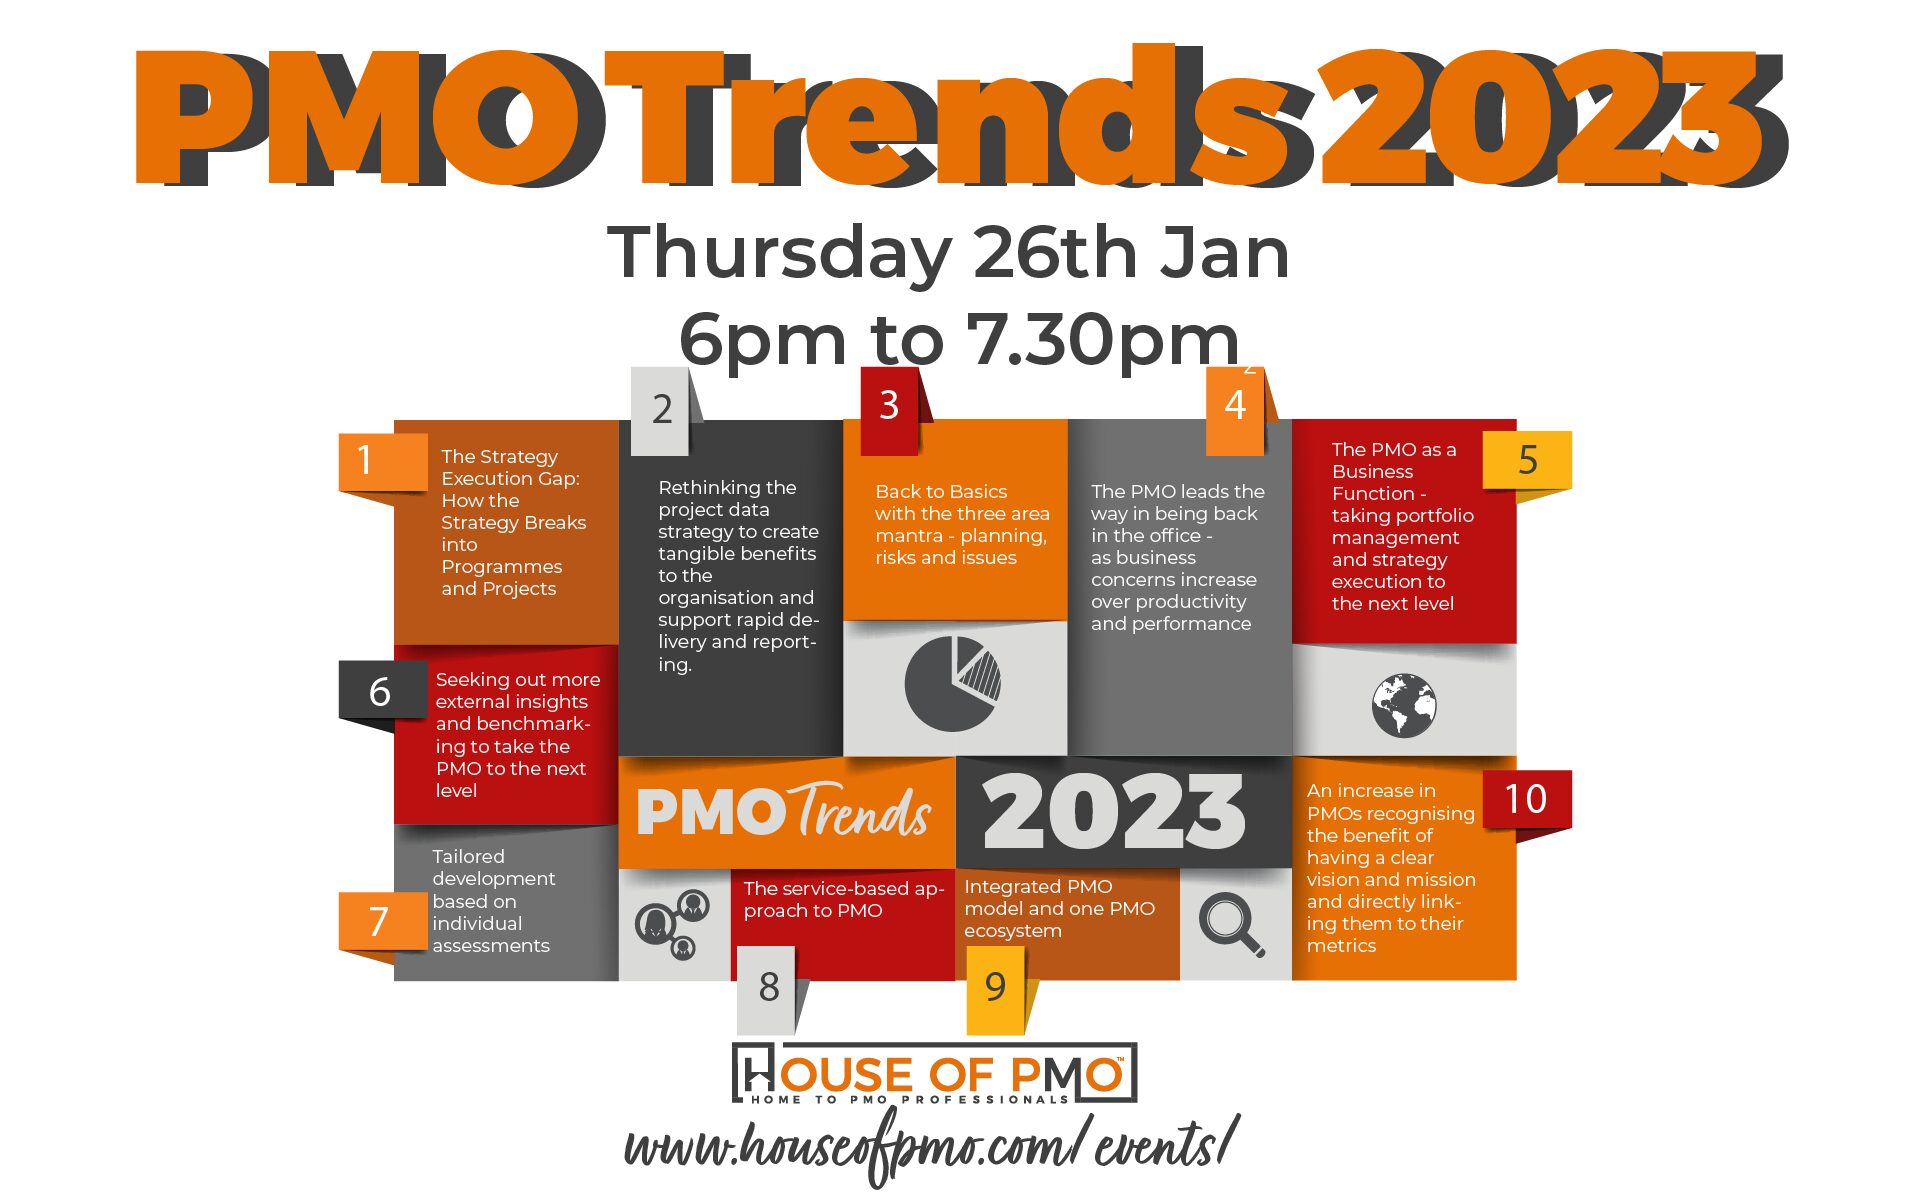 An image for the event PMO Trends 2023 happening on the 26th of January at 6pm